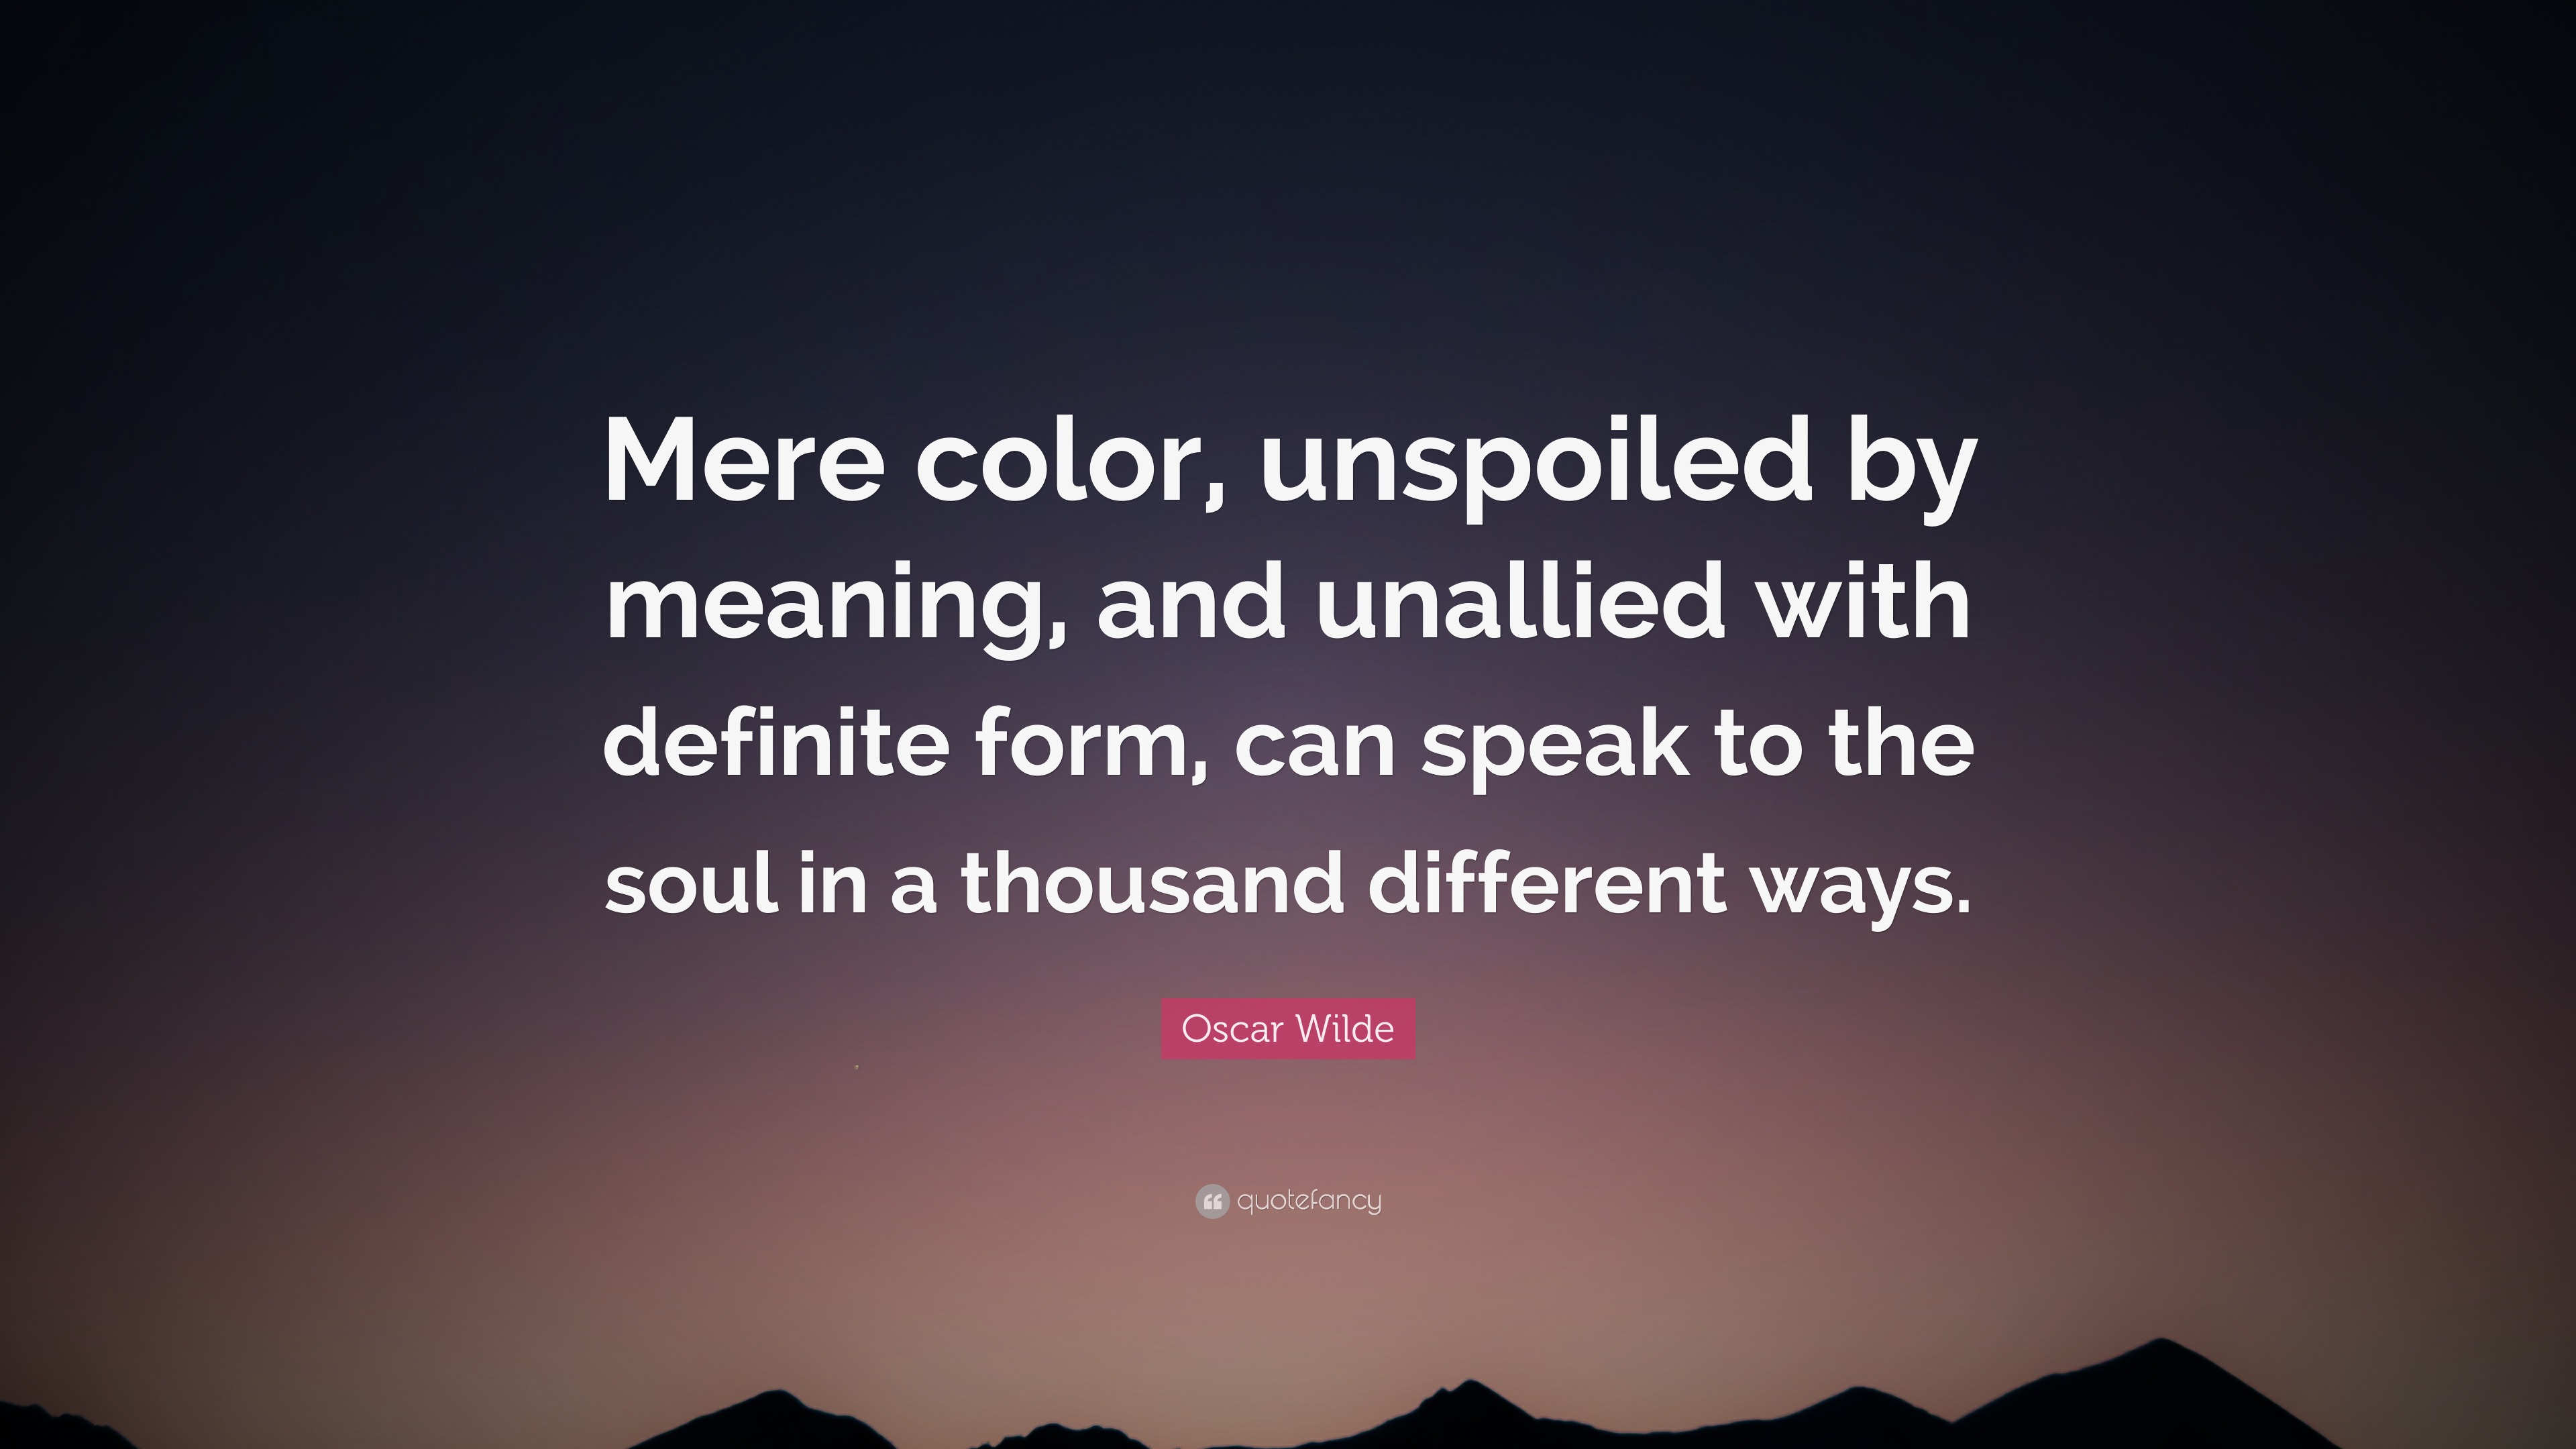 Oscar Wilde Quote Mere Color Unspoiled By Meaning And Unallied With Definite Form Can Speak To